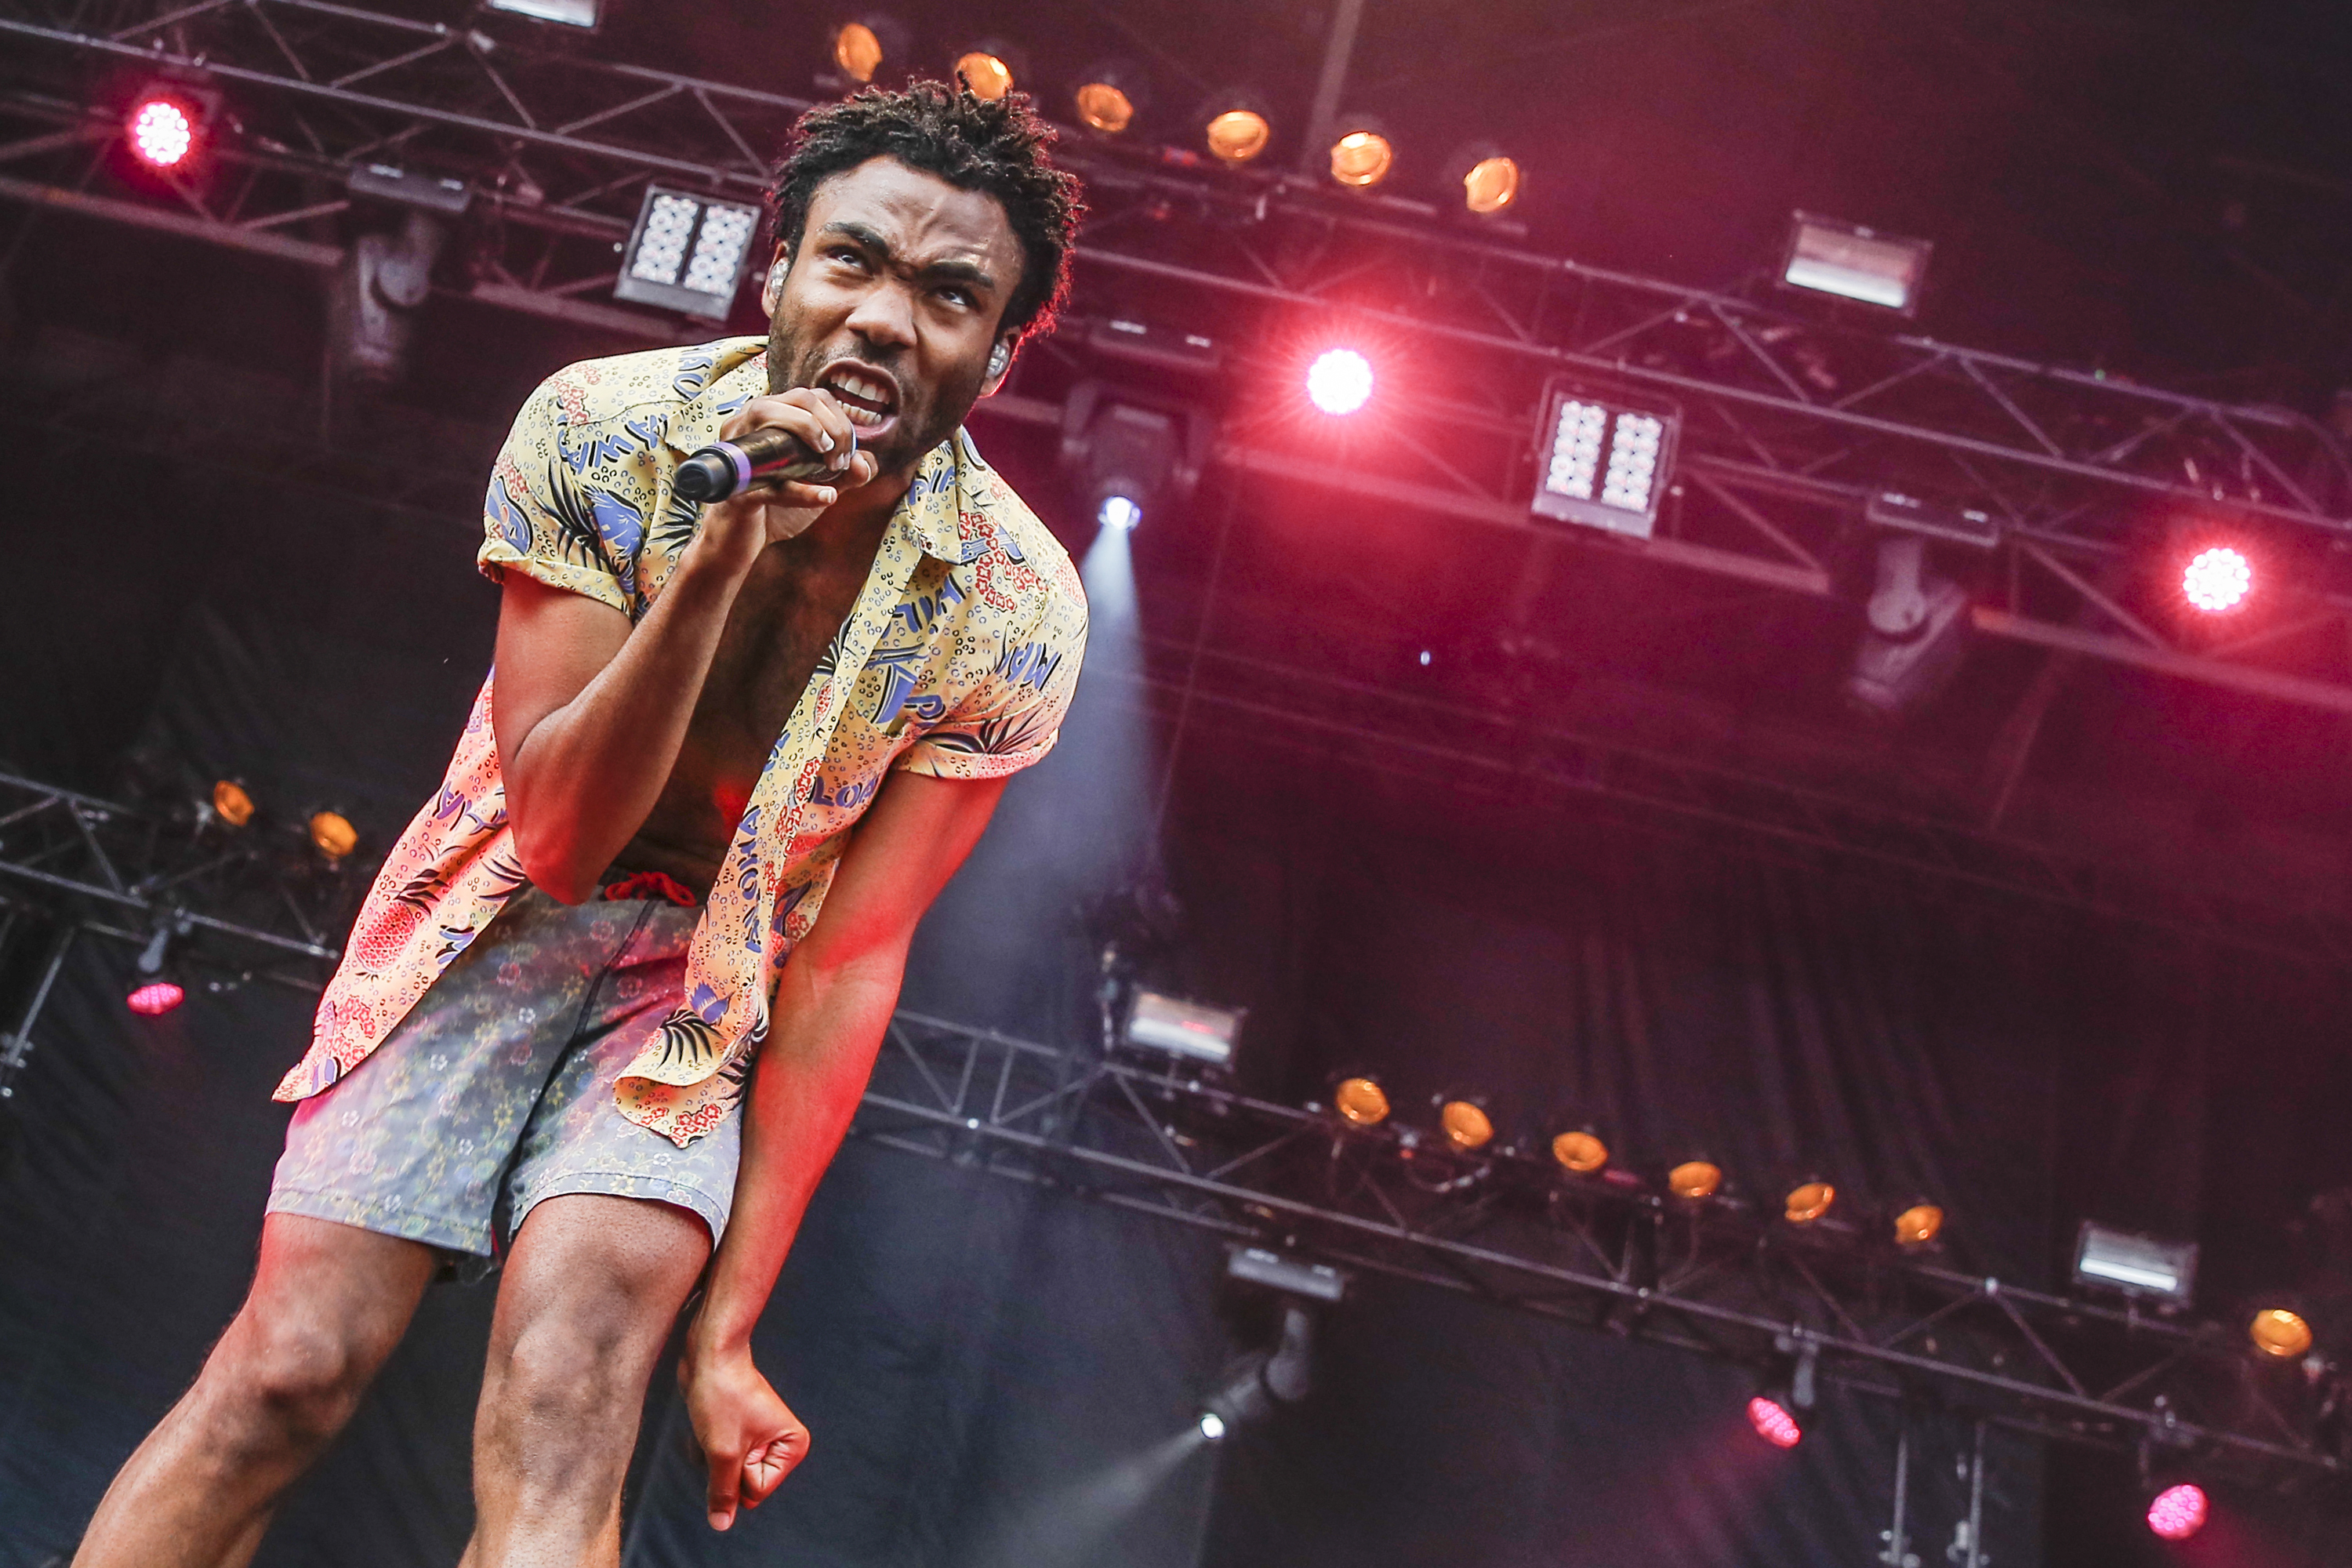 Childish Gambino performs at the RBC Royal Bank Bluesfest on July 12 in Ottawa, Canada. (Mark Horton&mdash;Getty Images)